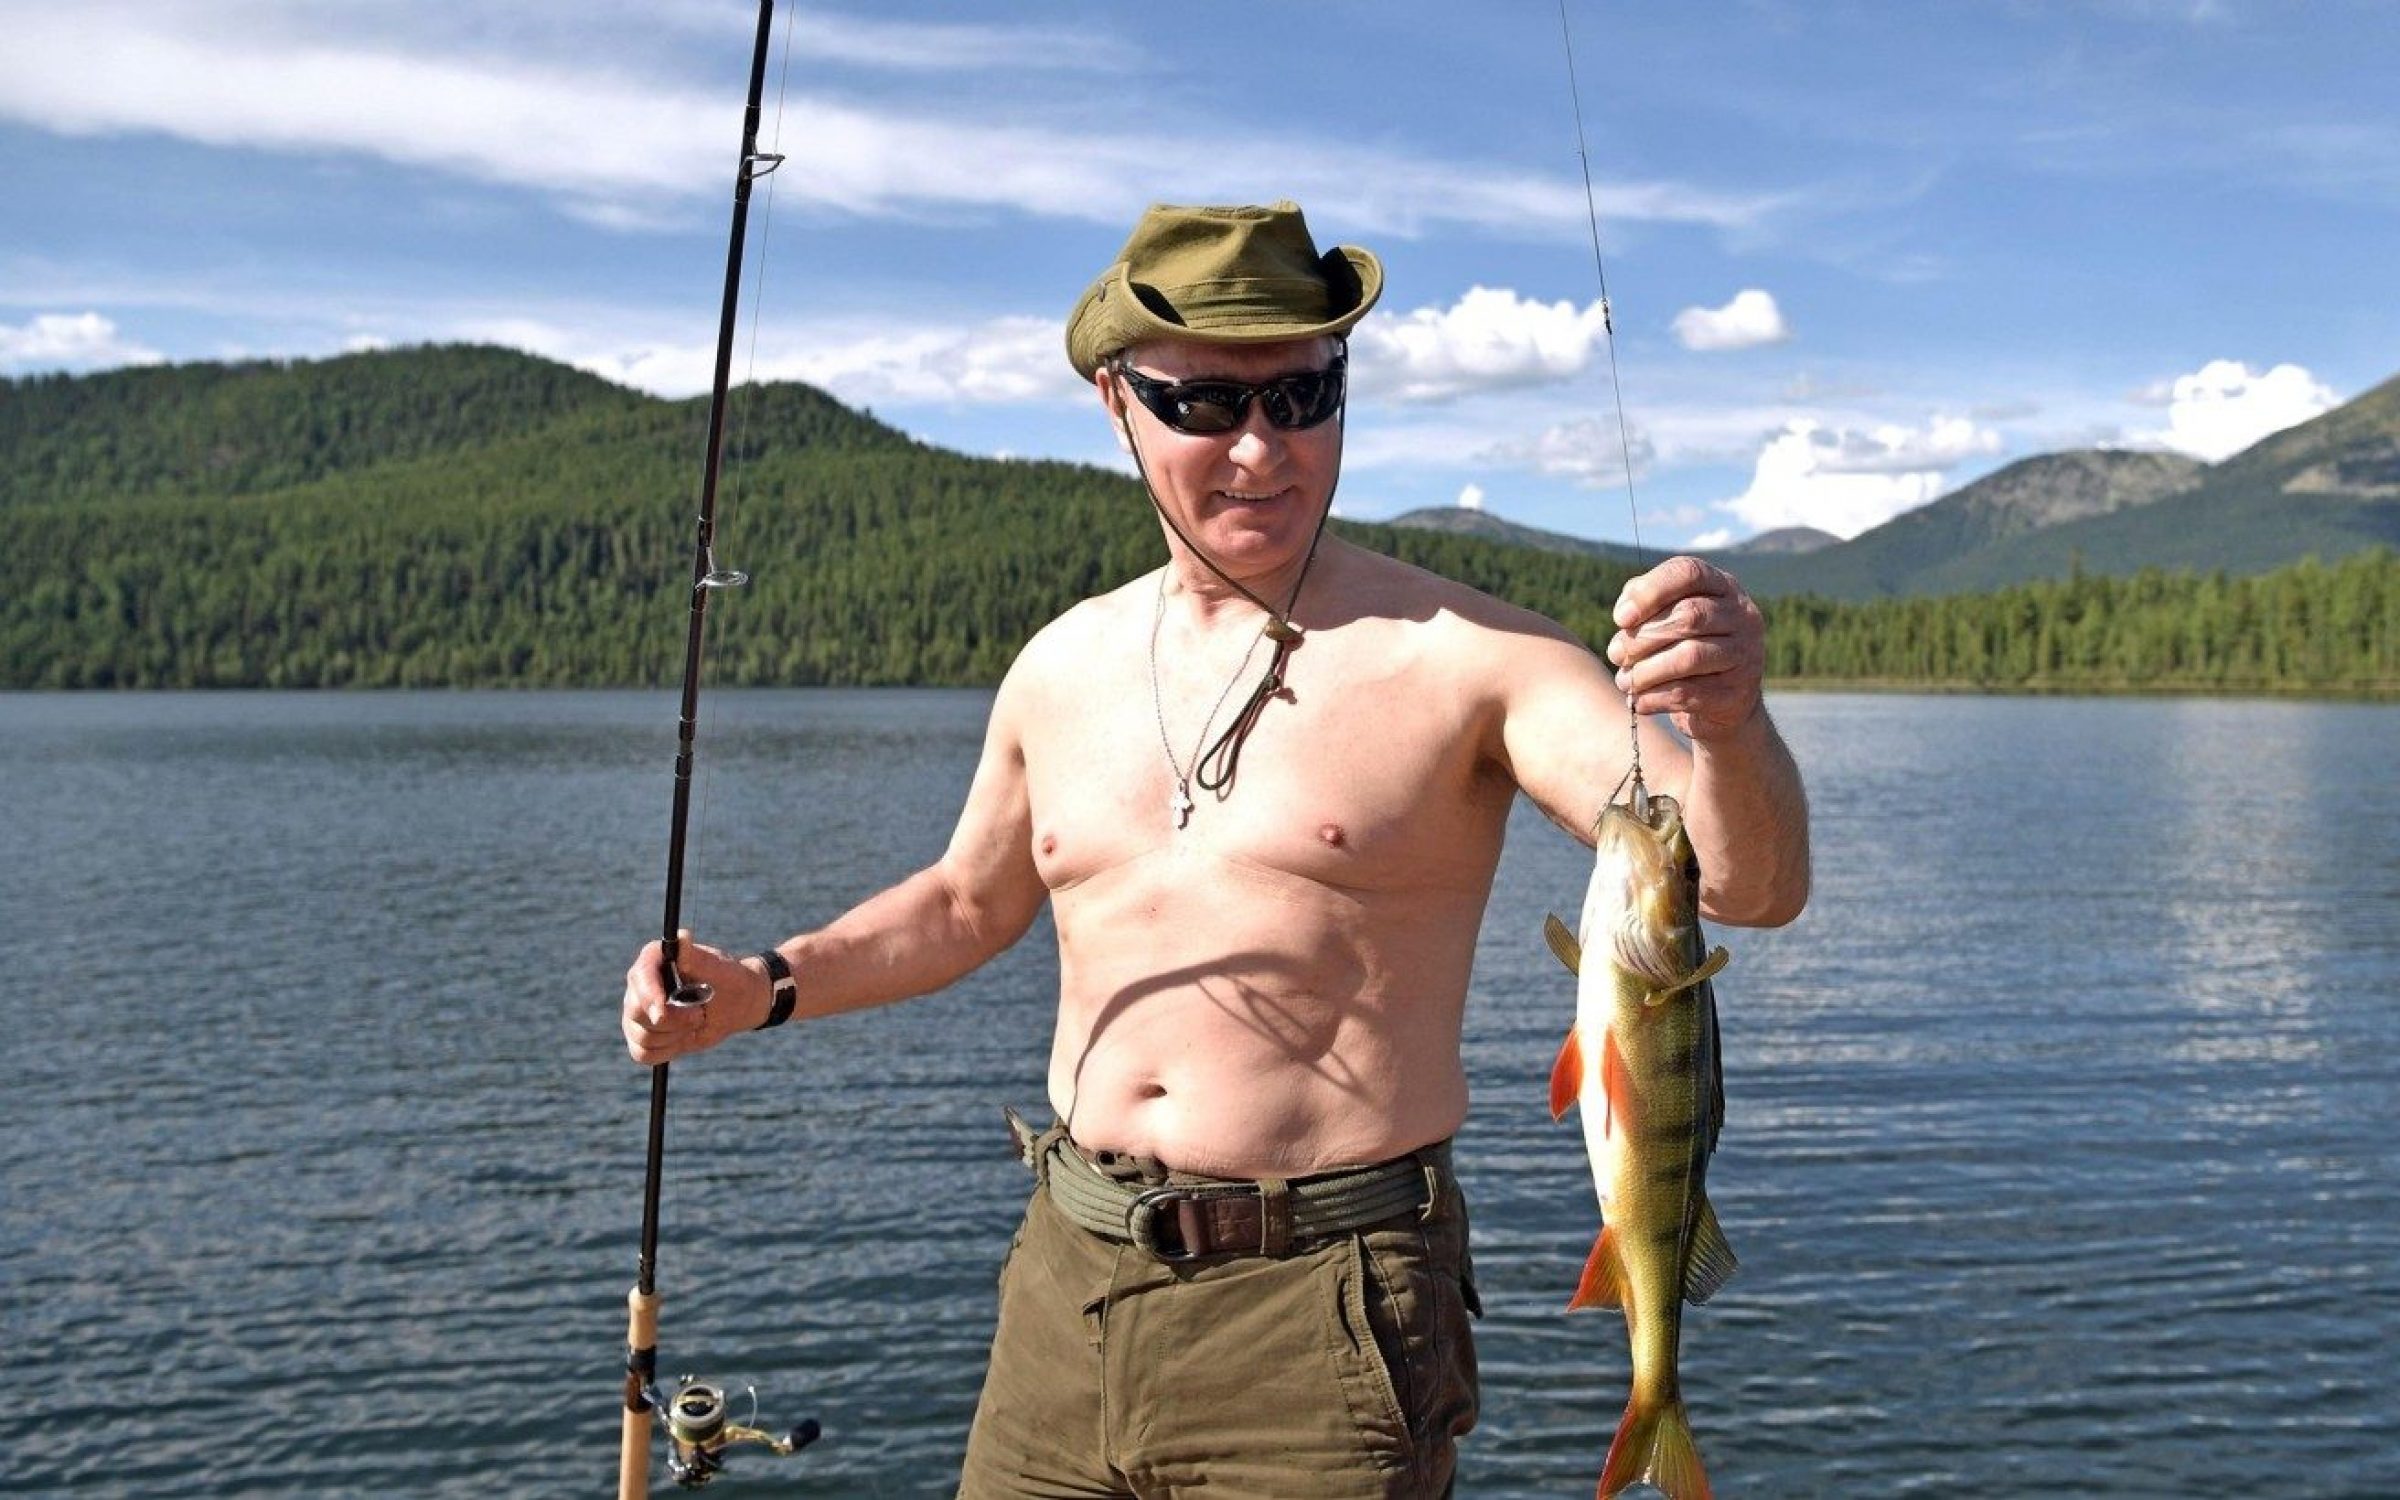 Russian President Vladimir Putin holds a fish he caught fishing during a three-day fishing and hunting trip in the Siberian wilderness near the Mongolian border August 1-3, 2017 in the Tyva Republic, Russia.